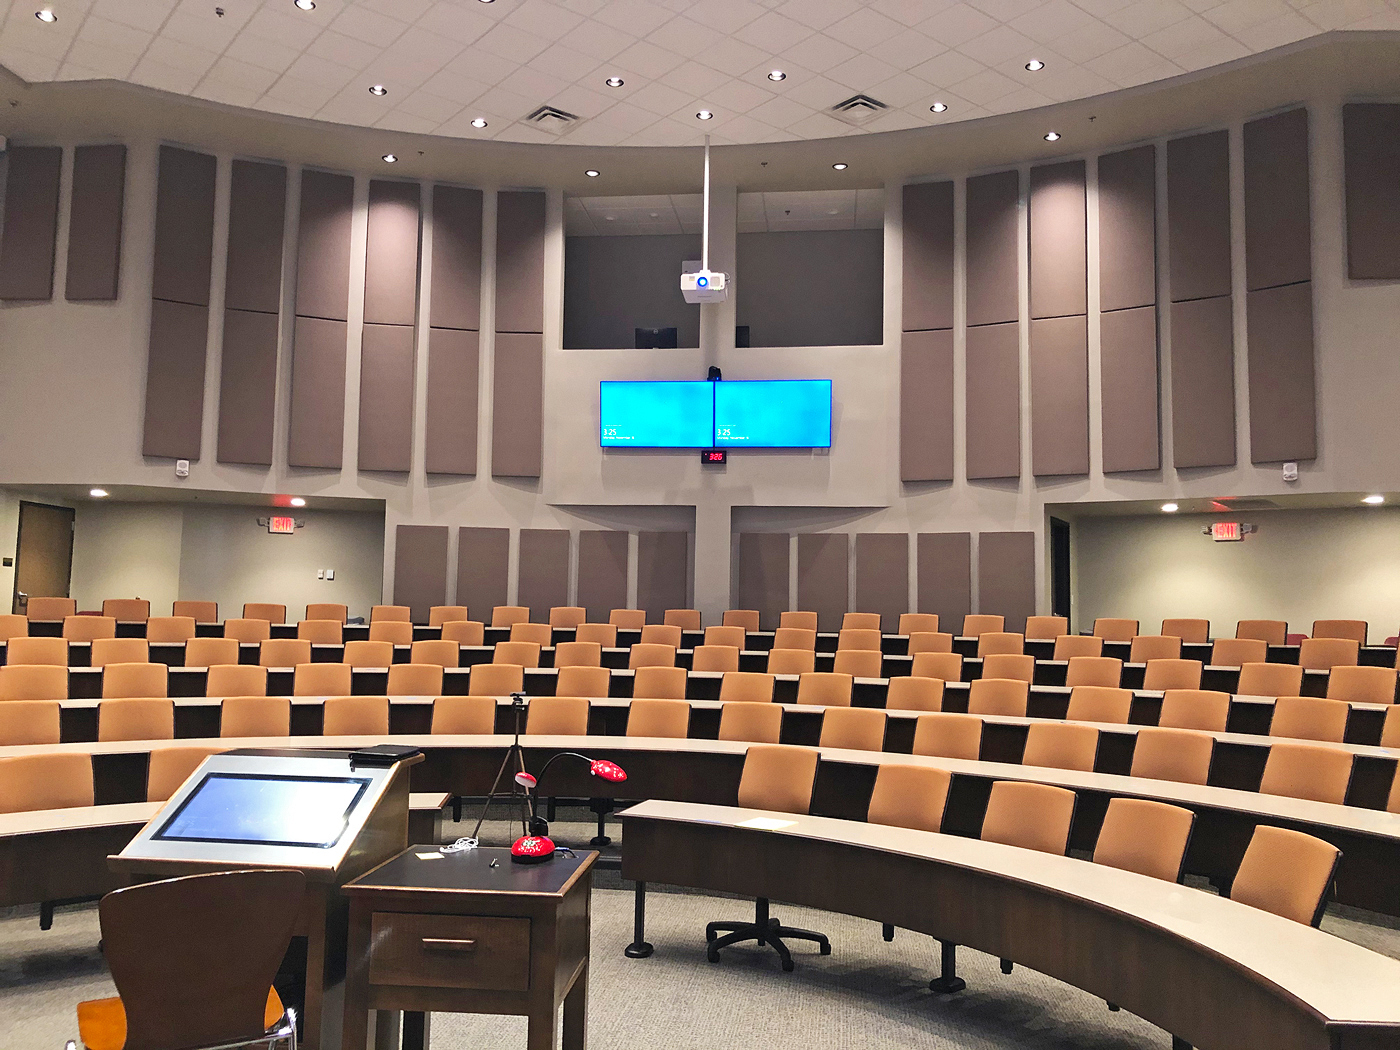 Lecture Hall viewed from presenter's position on-stage. The presenter podium in the foreground has a touchscreen for annotation and a document camera. Two flat panel display confidence monitors and a PTZ camera face the stage. Windows allow viewing from the second-floor mezzanine.